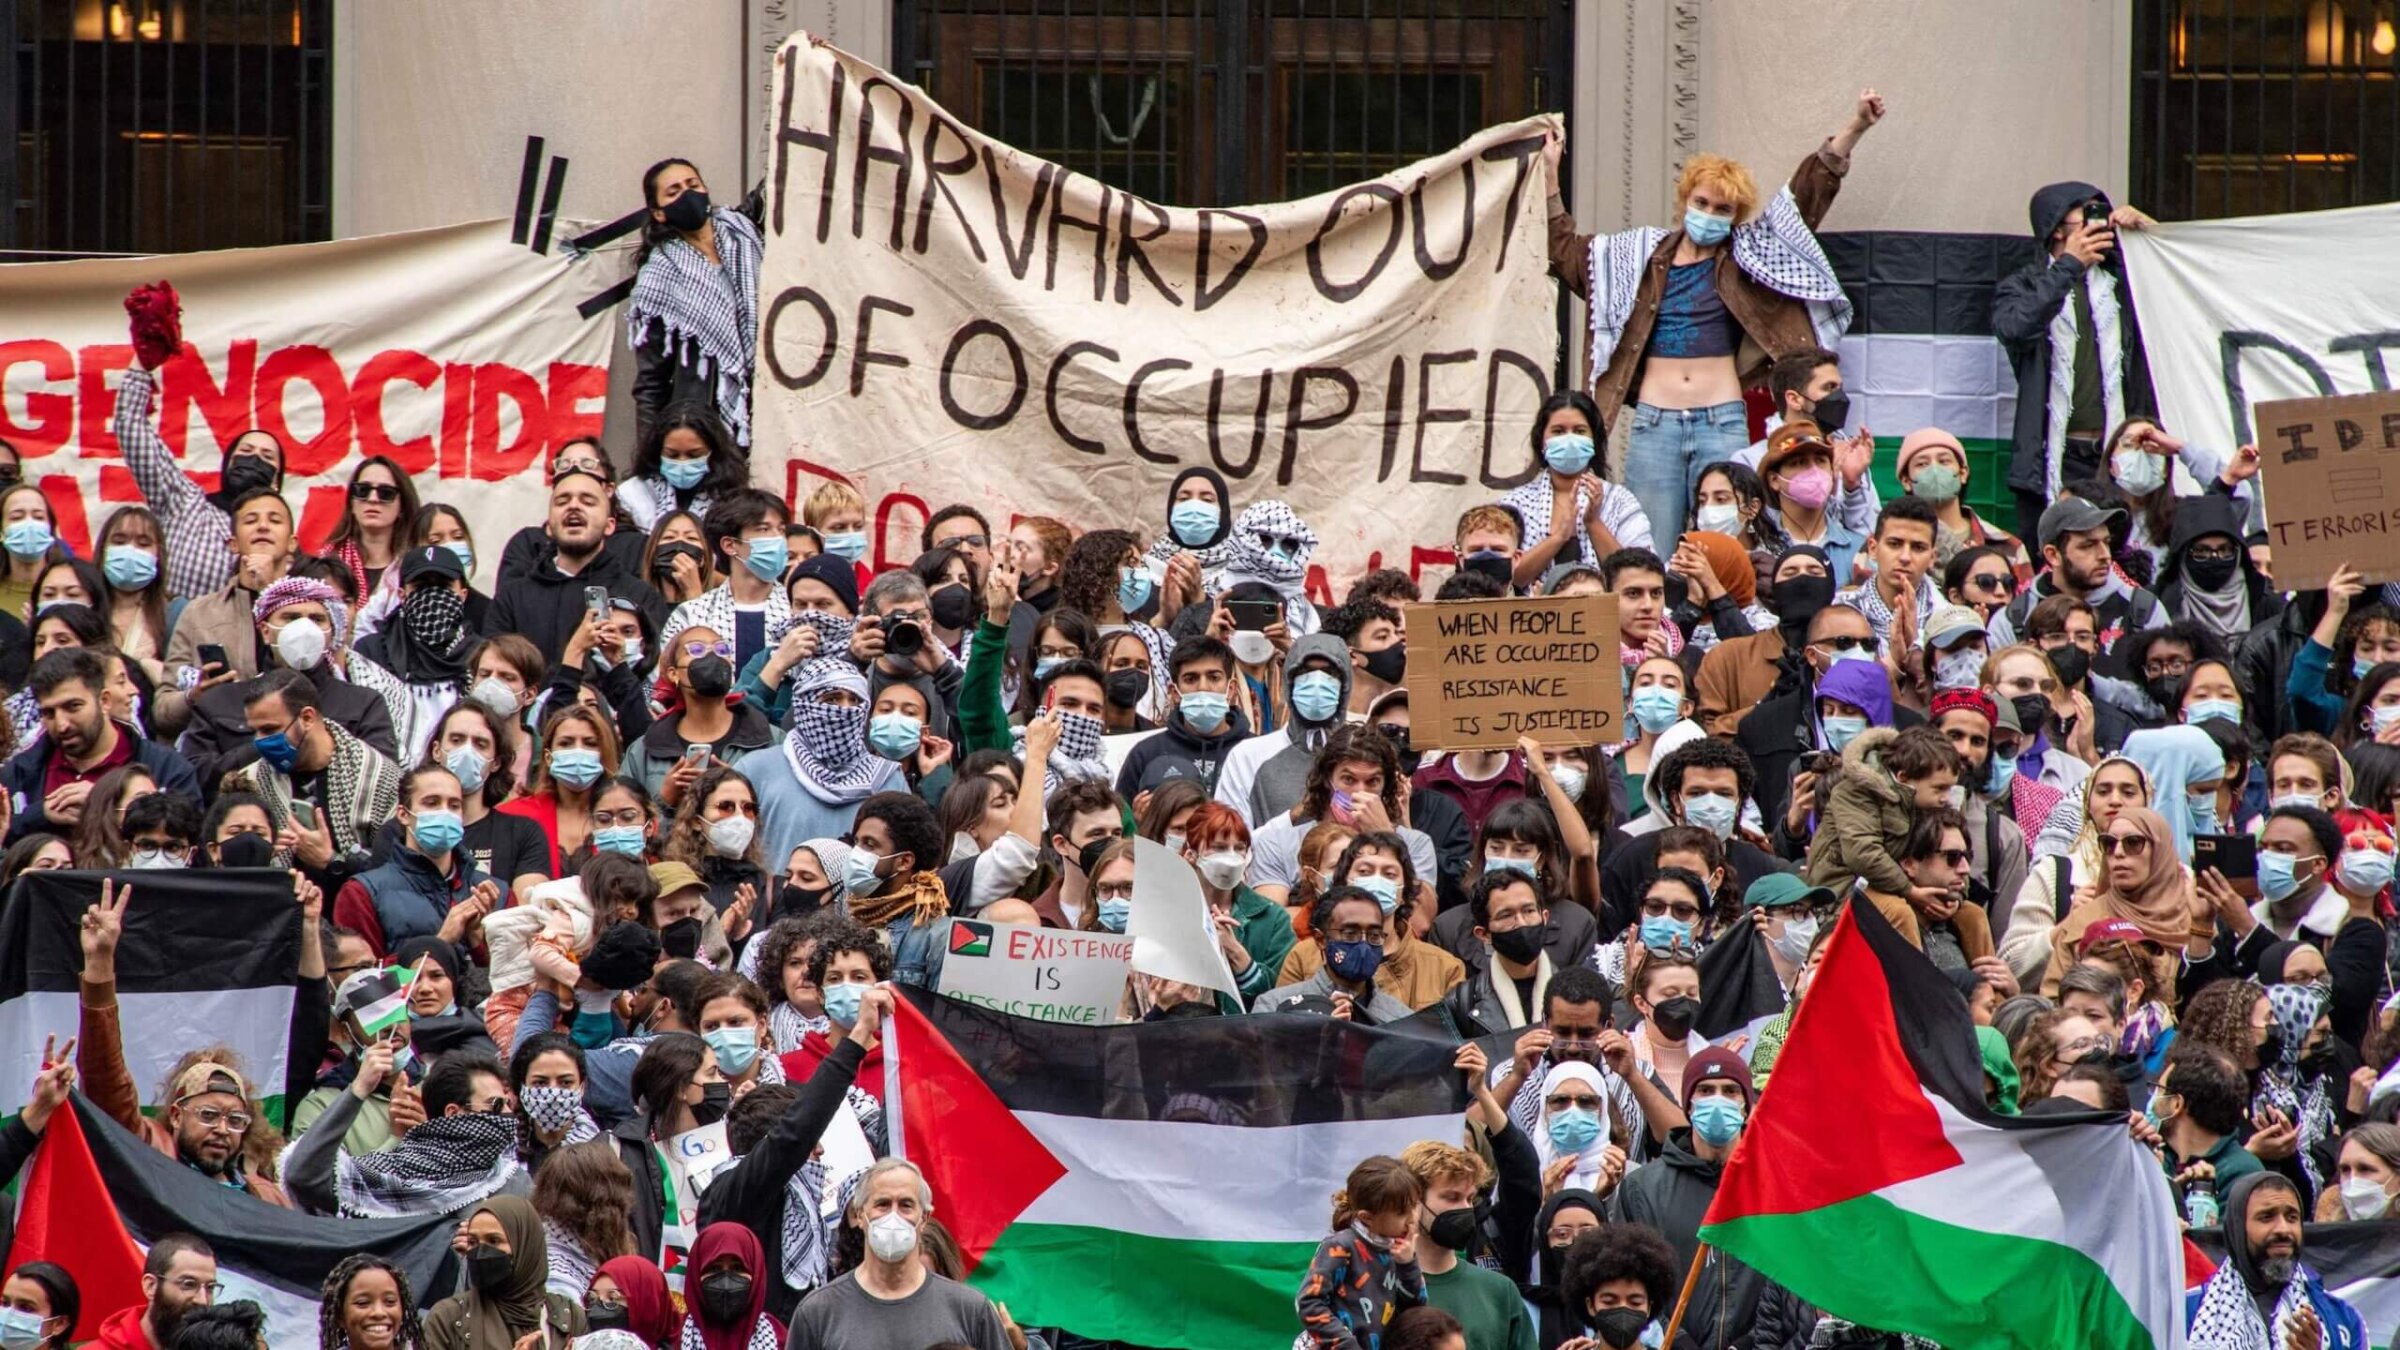 Supporters of Palestinians gathered at Harvard University to show their support for Gaza at a rally in Cambridge, Massachusetts, earlier this month.